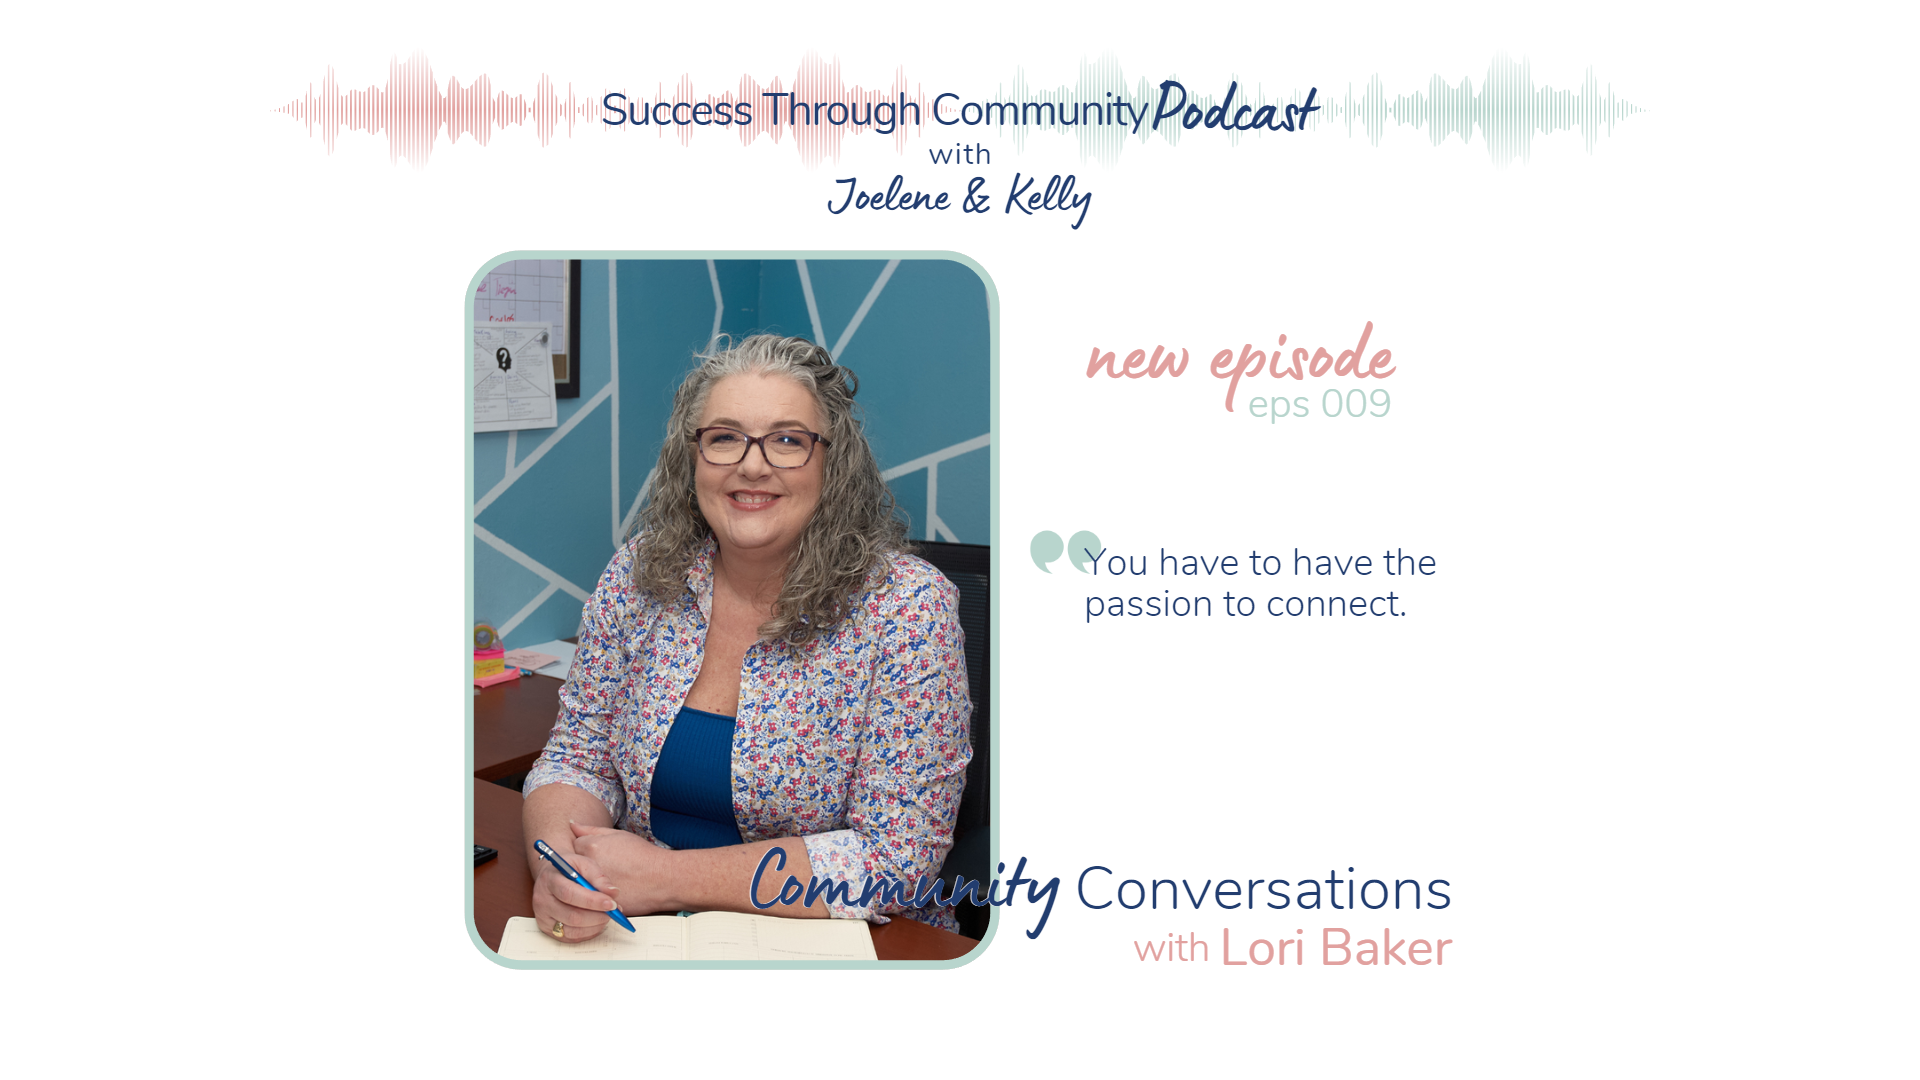 Success Through Community podcast episode 09 with Lori Baker